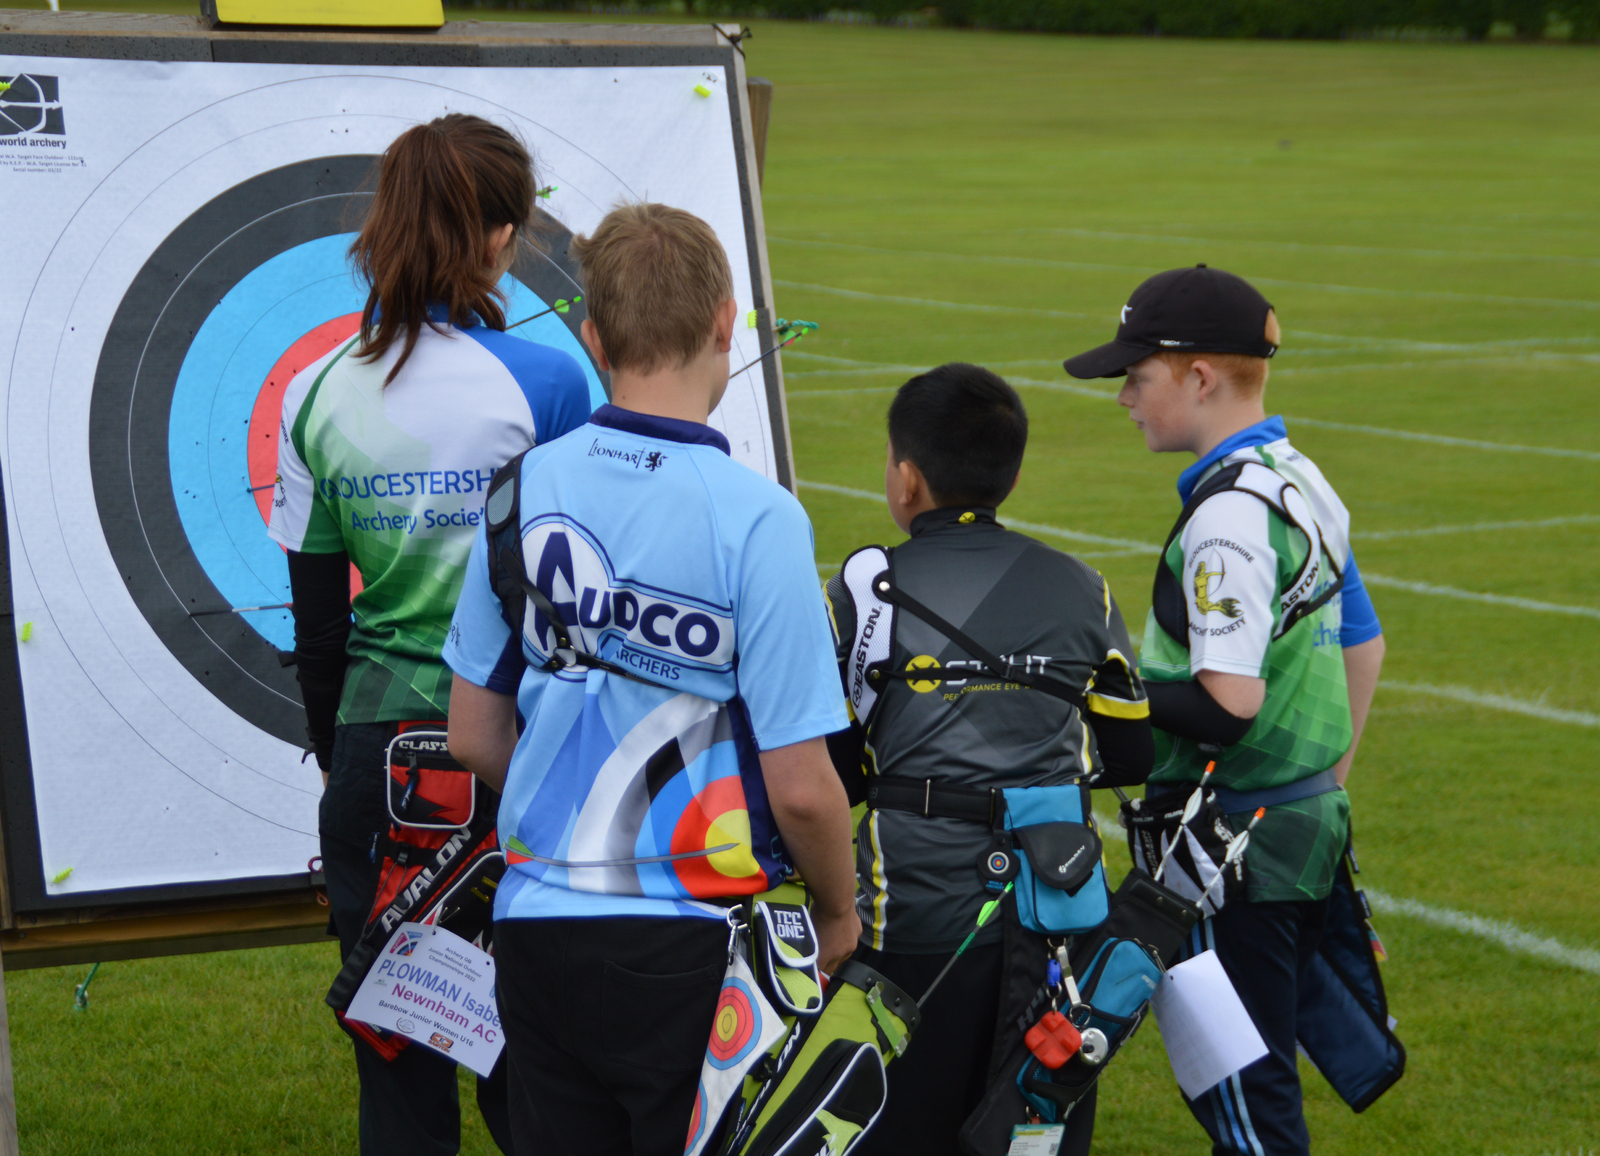 Children at an archery competition